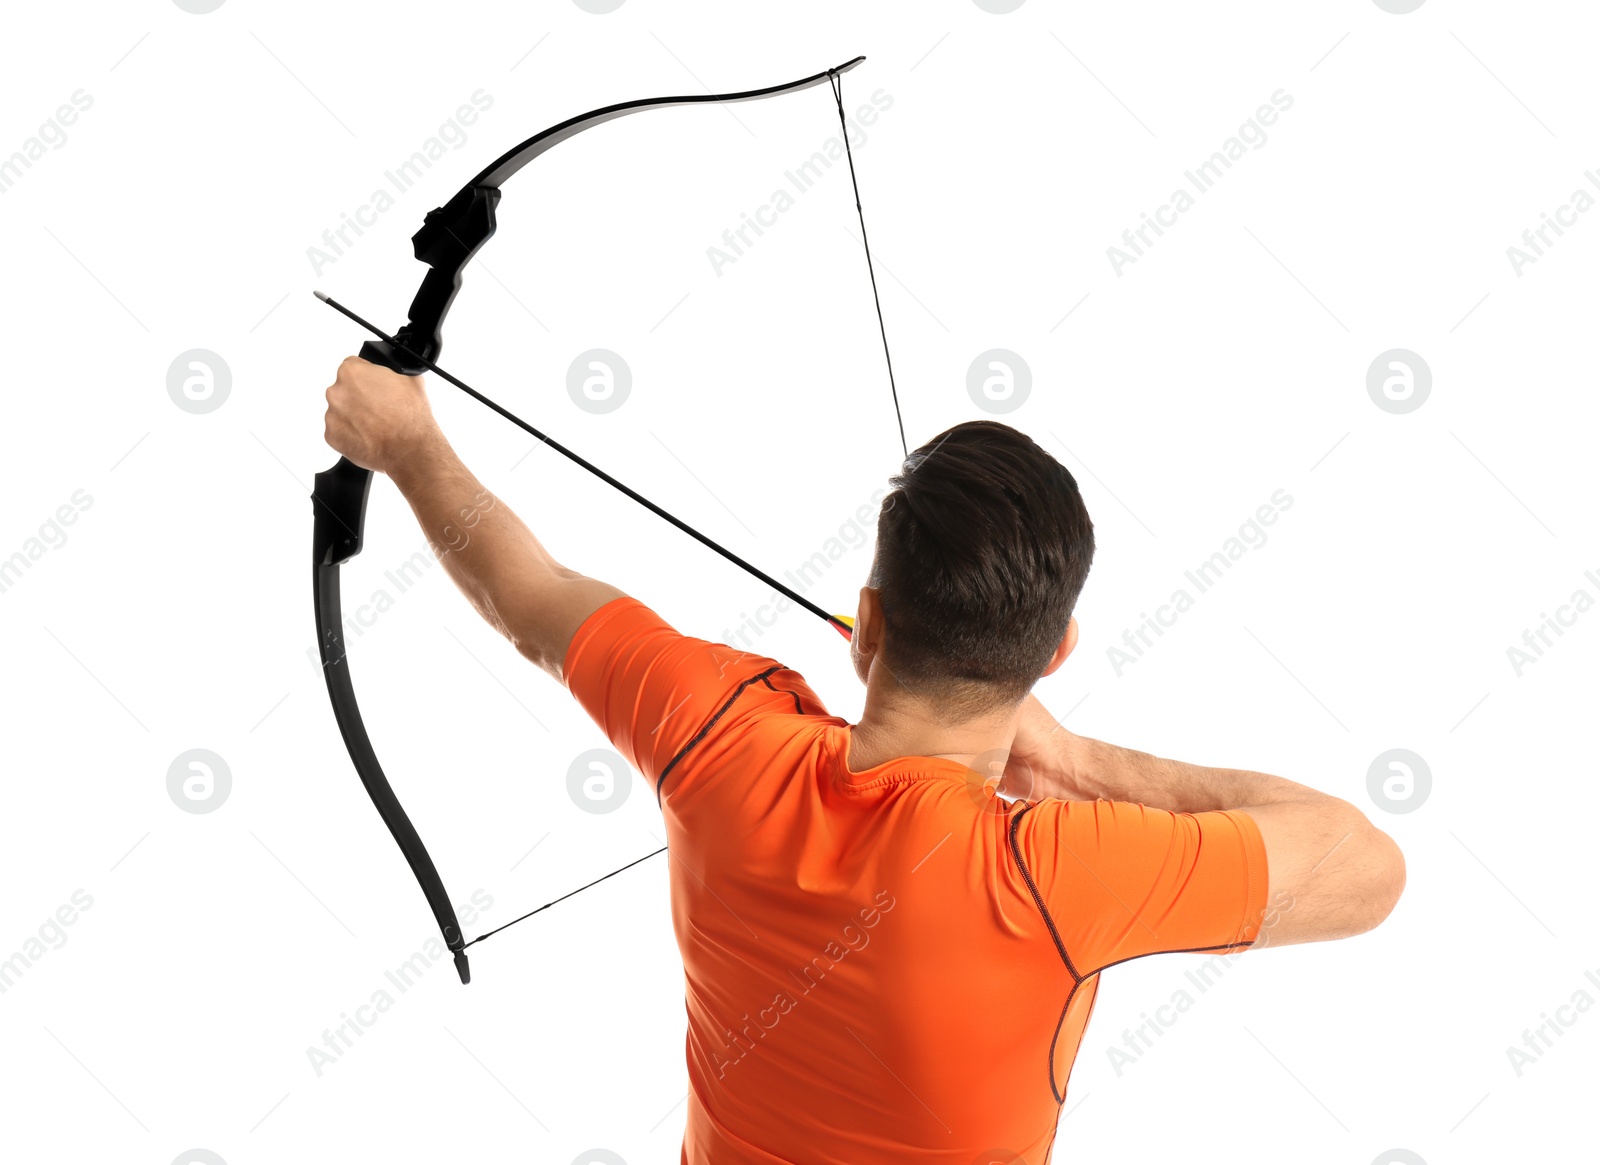 Photo of Man with bow and arrow practicing archery on white background, back view